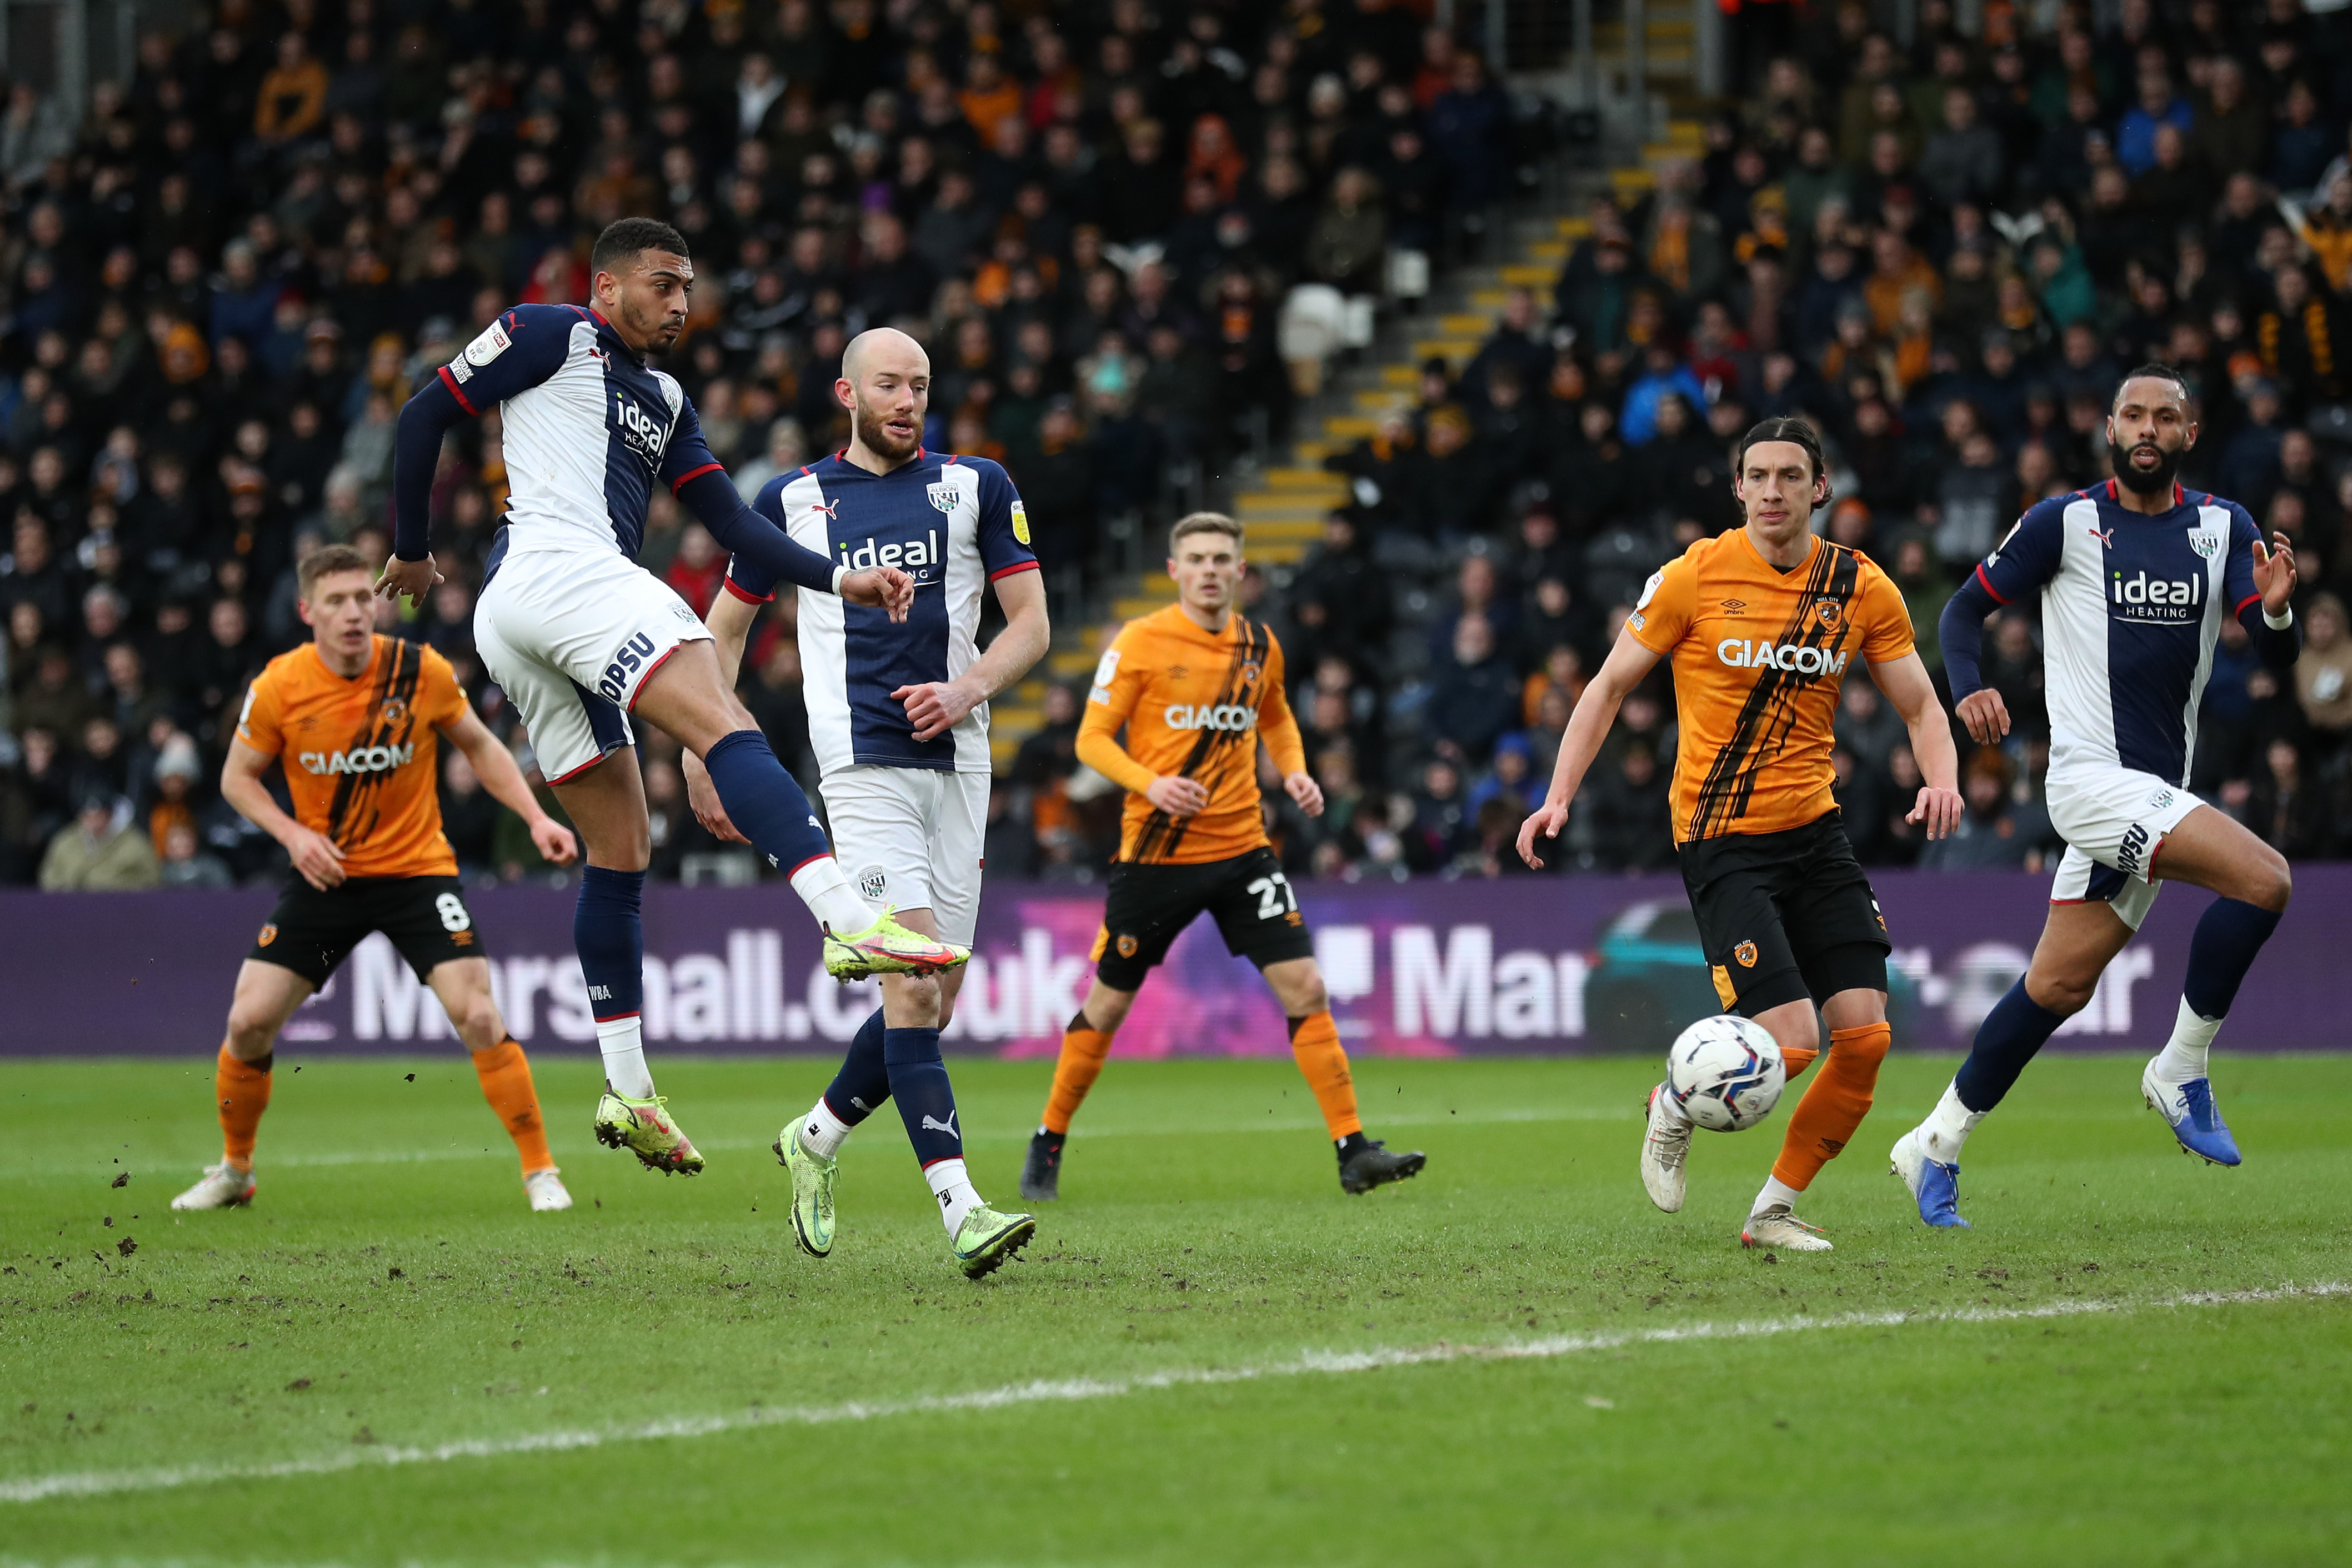 Karlan Grant scores a goal against Hull in March 2022